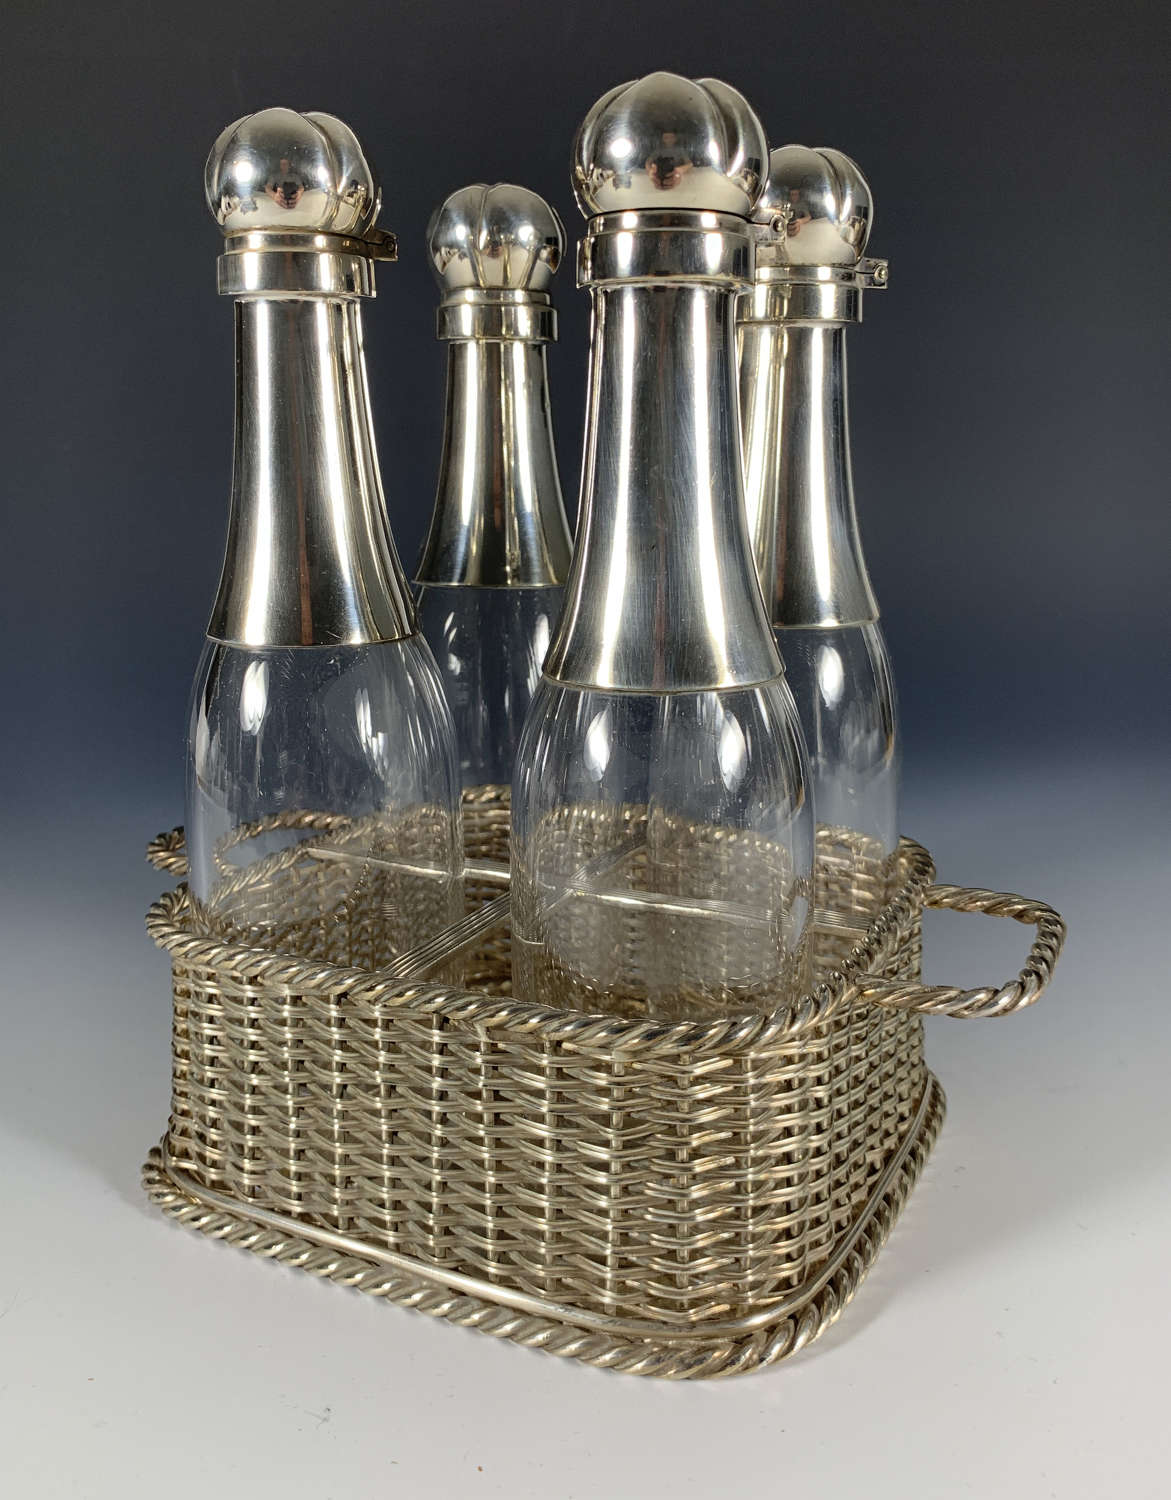 A four piece Champagne decanter set in woven basket